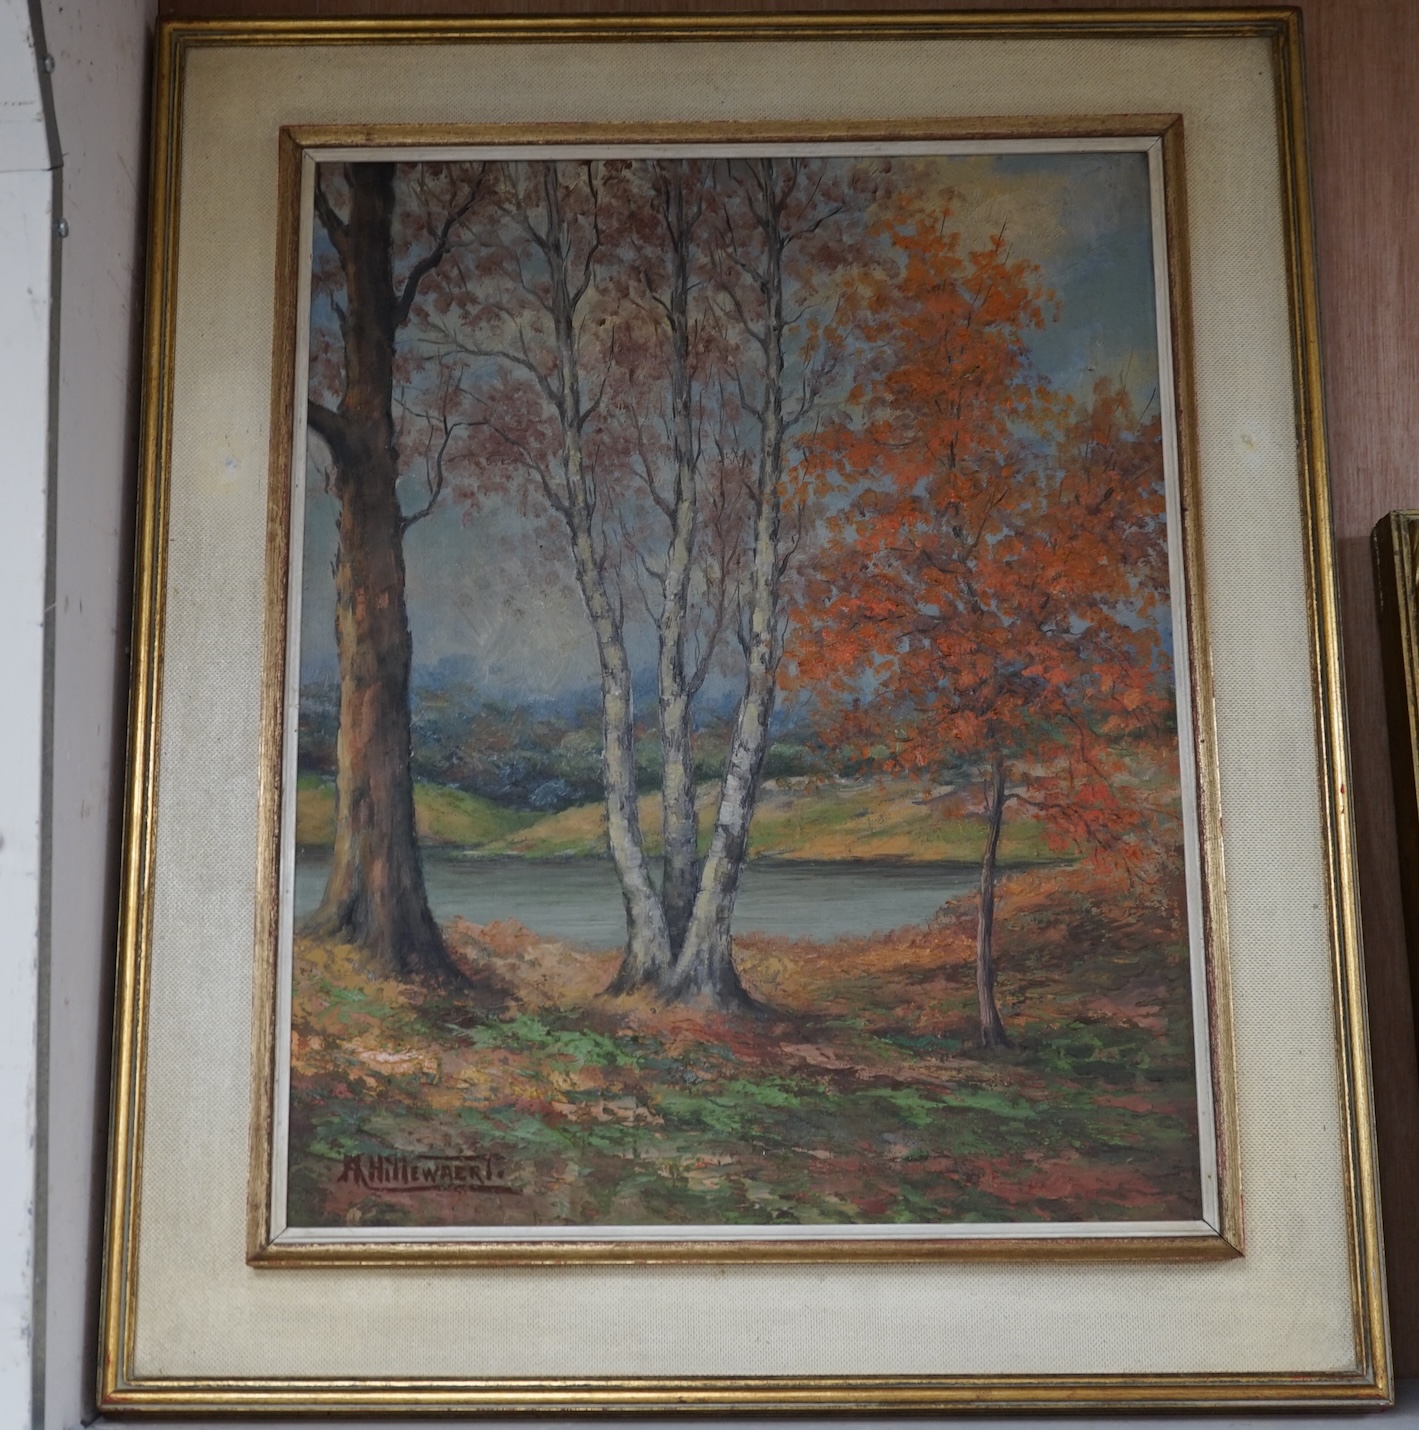 A. H. Hillewaert?, Impressionist oil on canvas, Autumnal wooded landscape, signed, 48 x 38cm. Condition - good, a little dirty